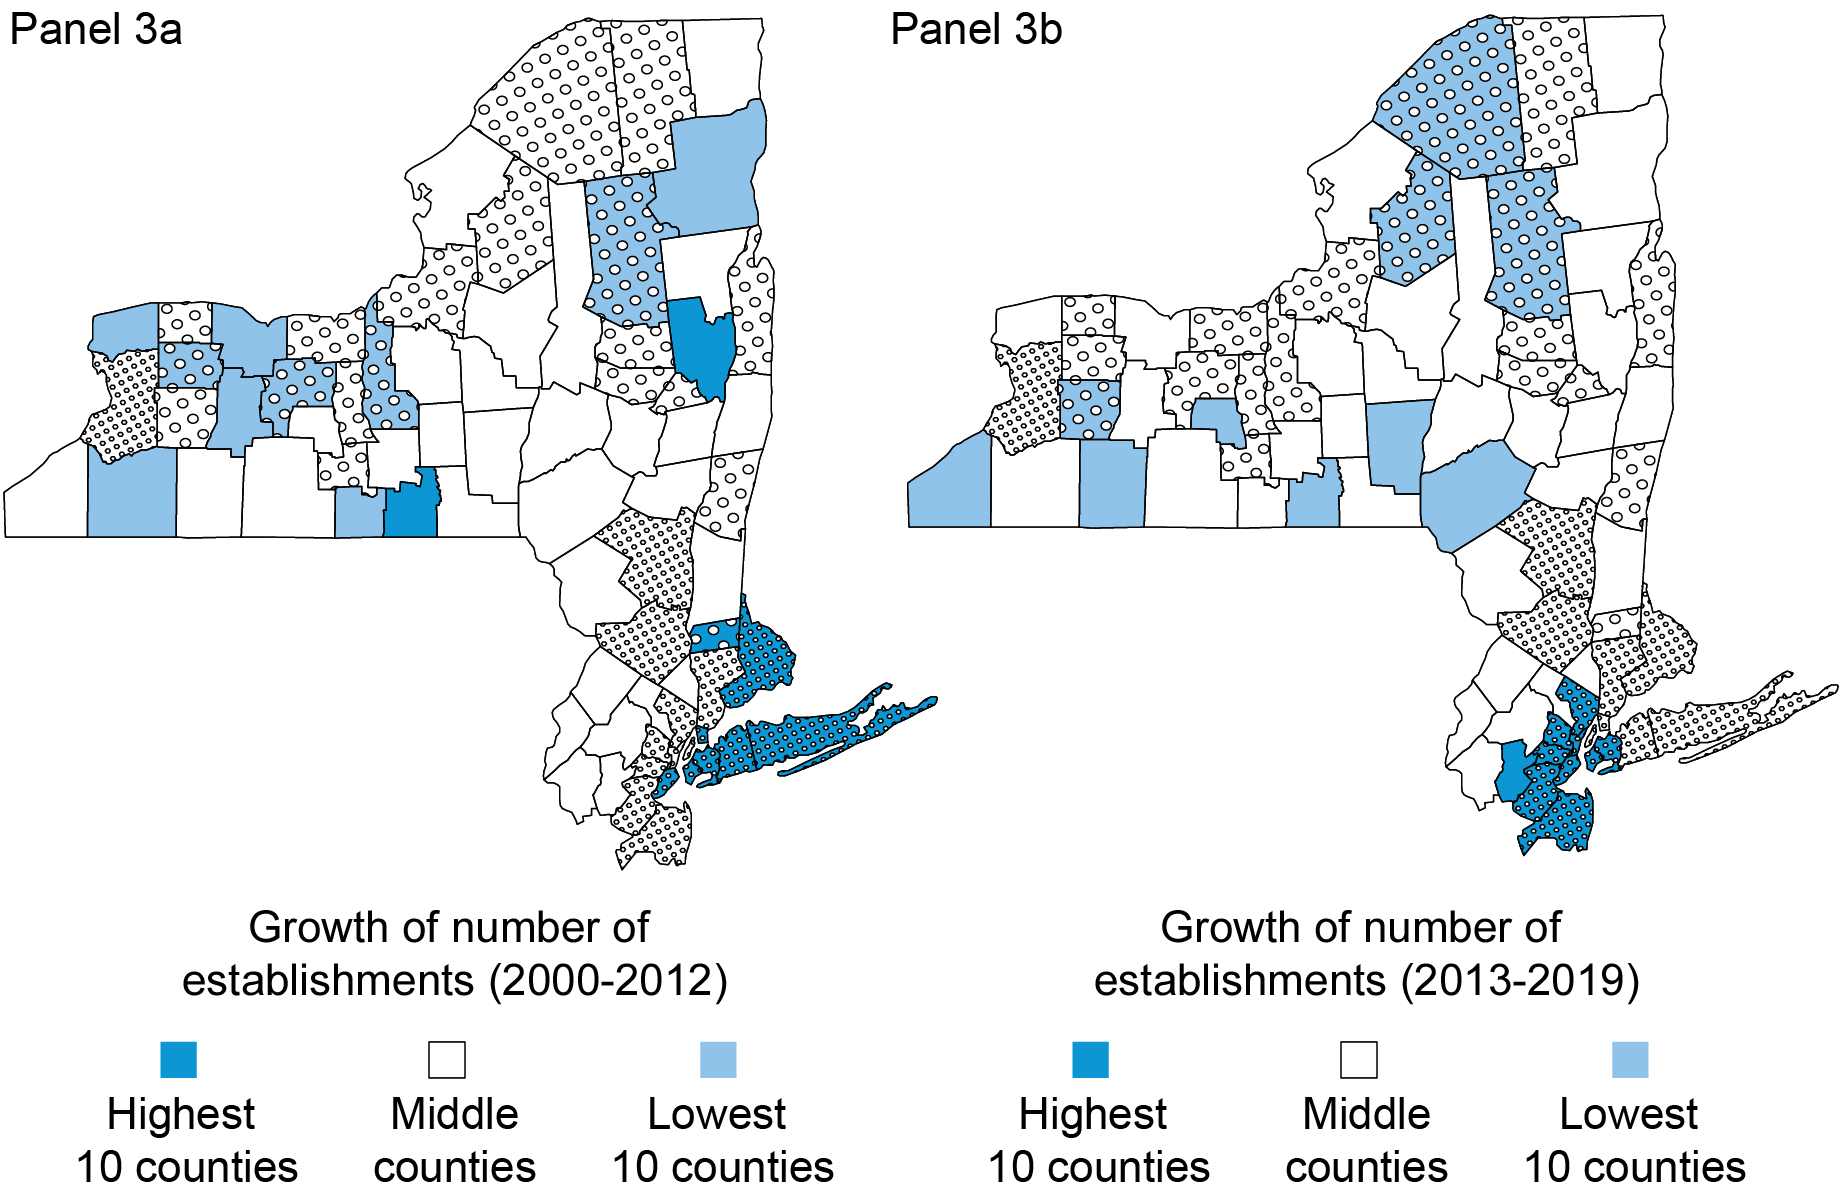  Flood risk maps of the Federal Reserve’s Second Dstrict plotting the distribution of the number of establishments across all industries in 2000 to 2012 (left) and the distribution of the ratio of the number of establishments across all industries in 2013 to 2019 (right). 